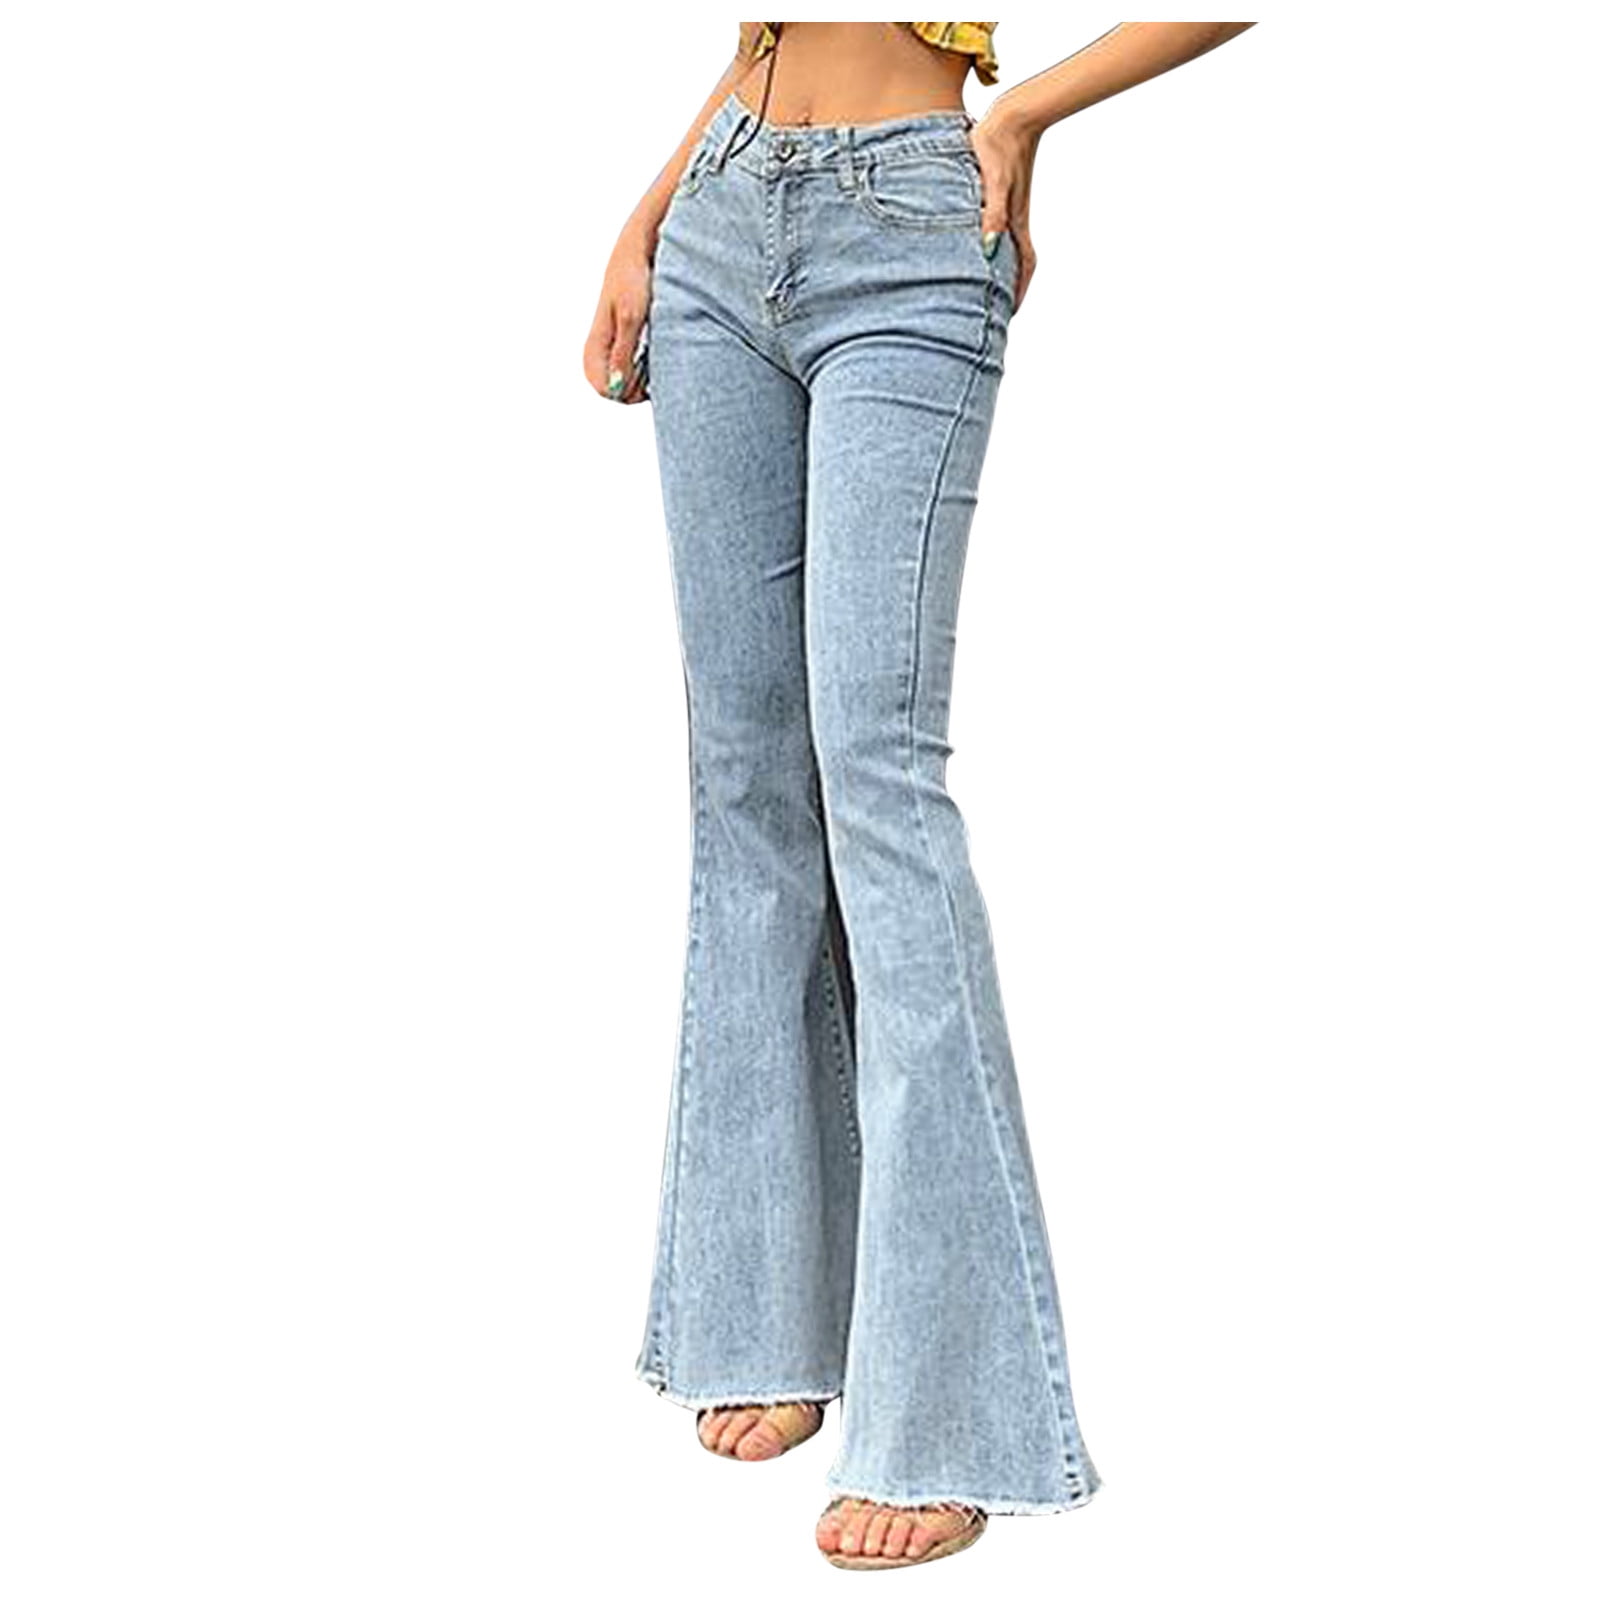 MOTEL X JACQUIE Roomy Extra Wide Low Rise Jeans in Mid Blue Used –  motelrocks.com